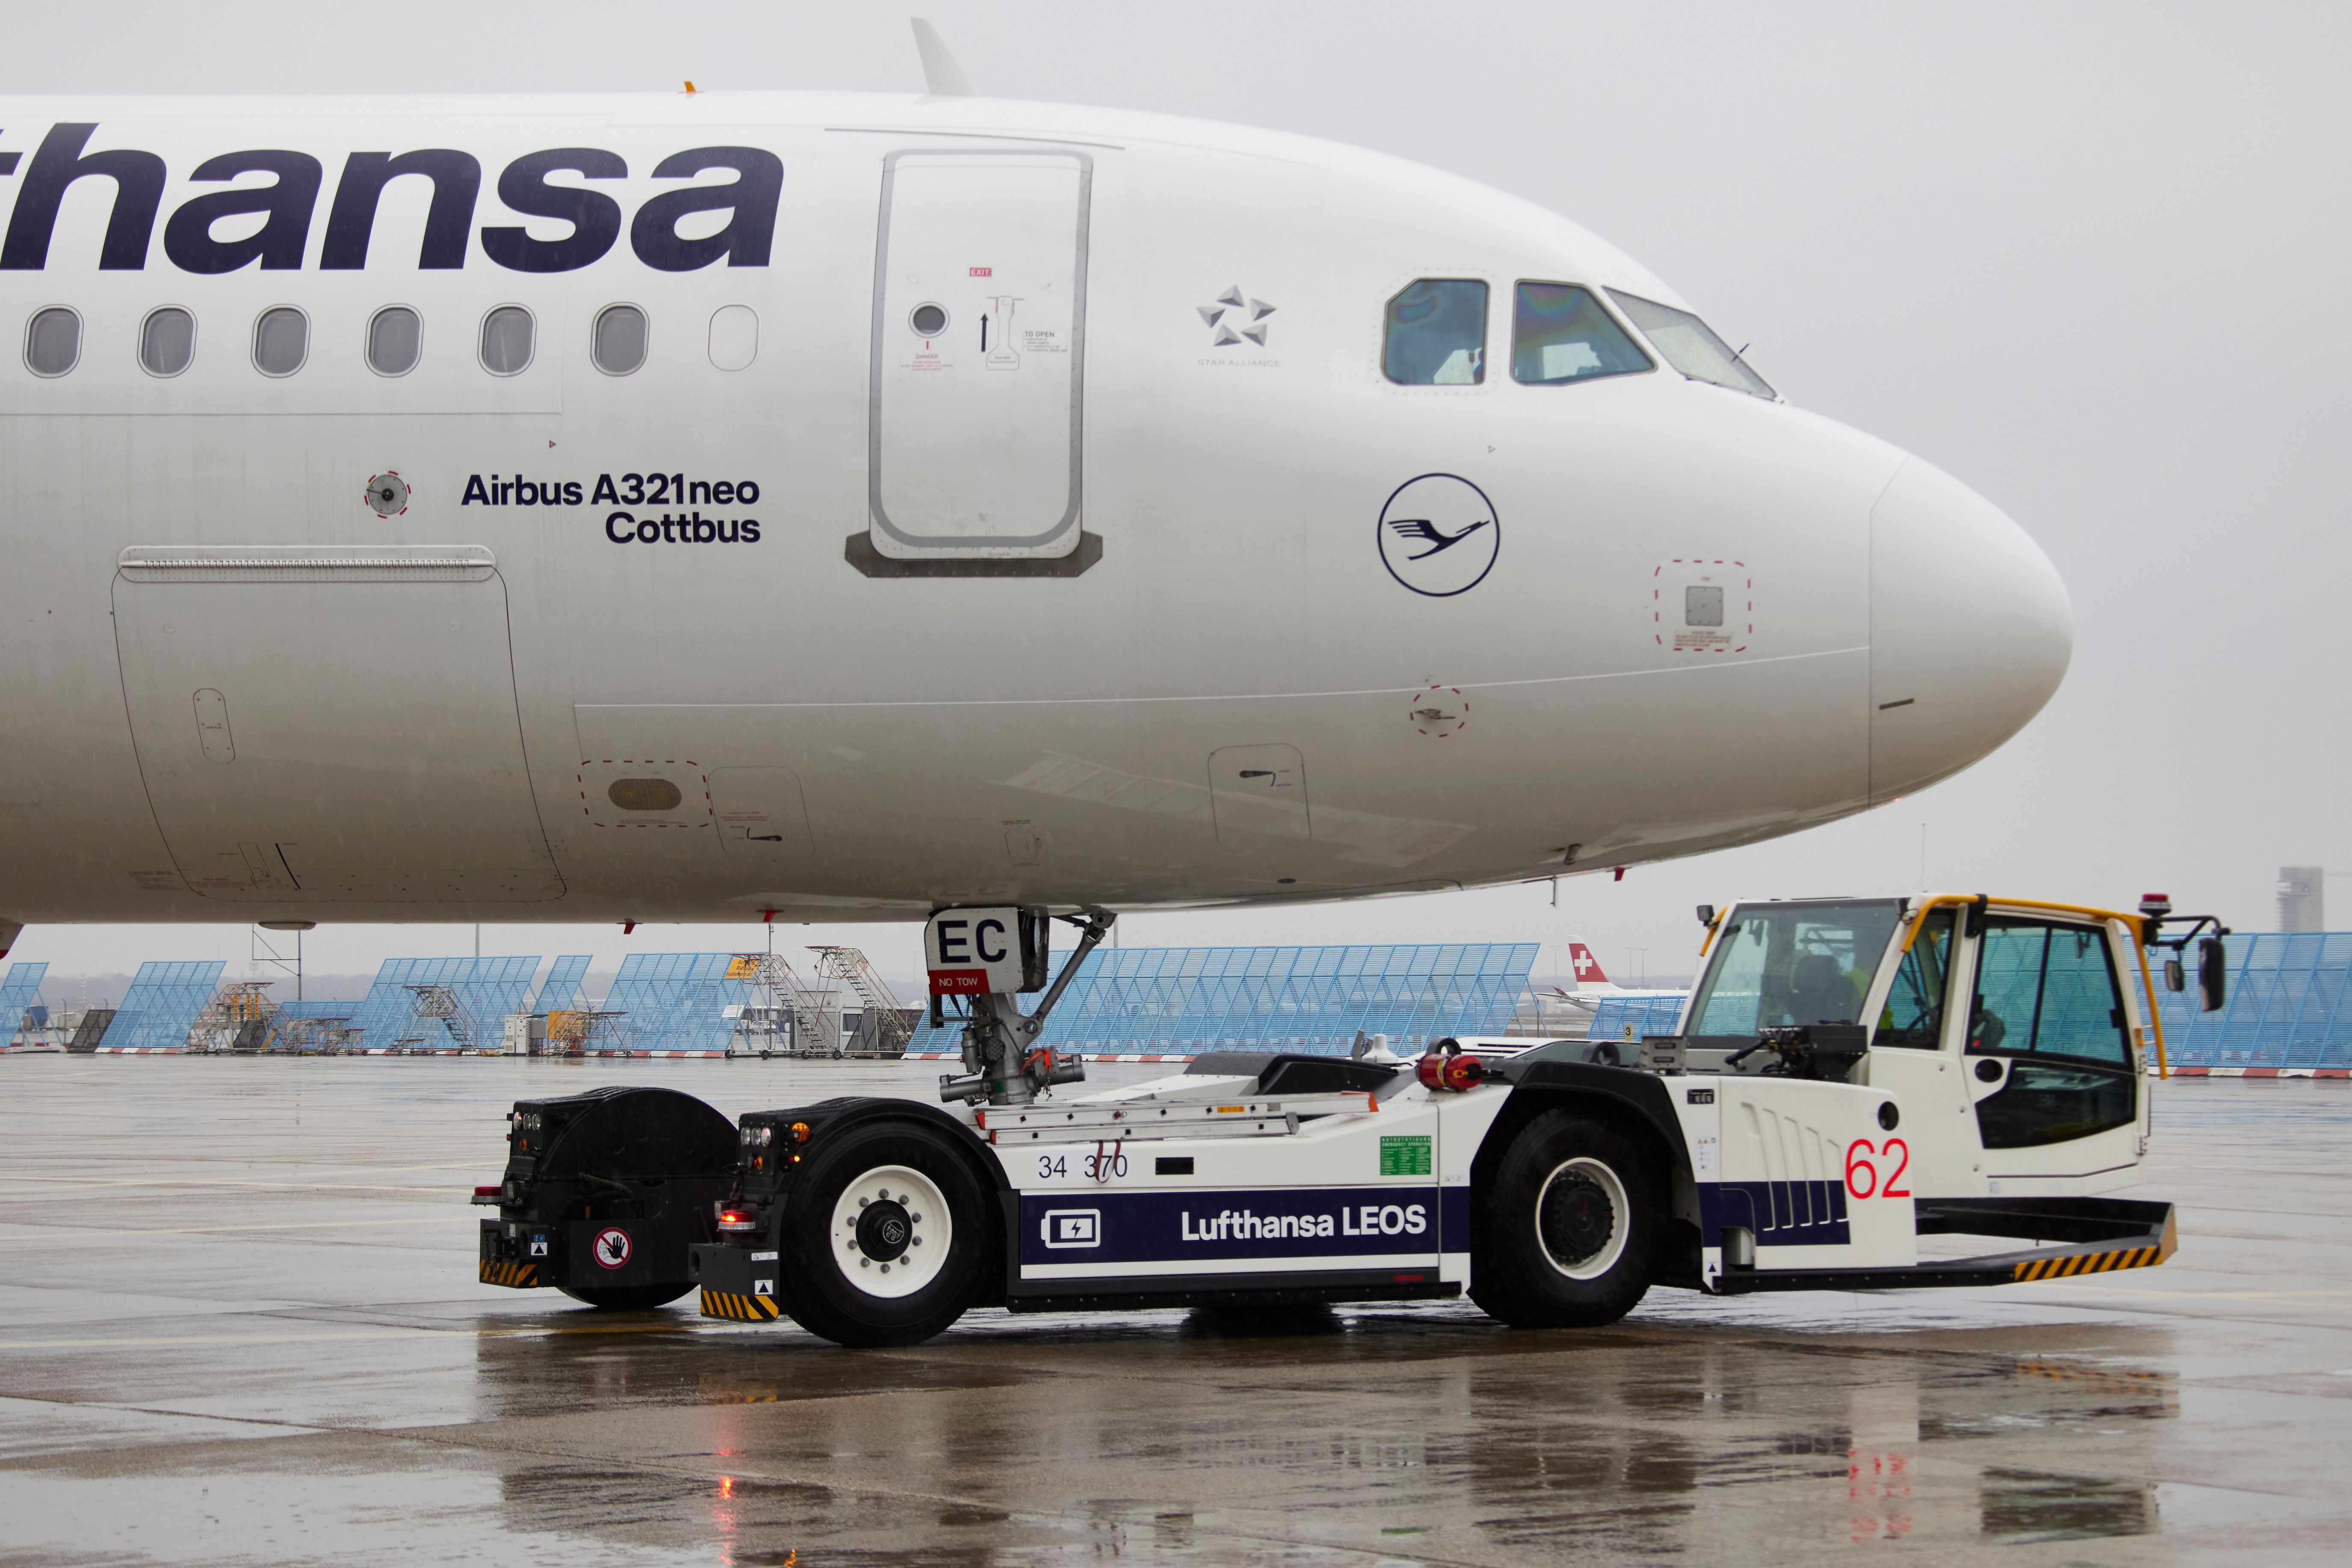 Lufthansa A320neo aicraft being tugged by ground support vehicle